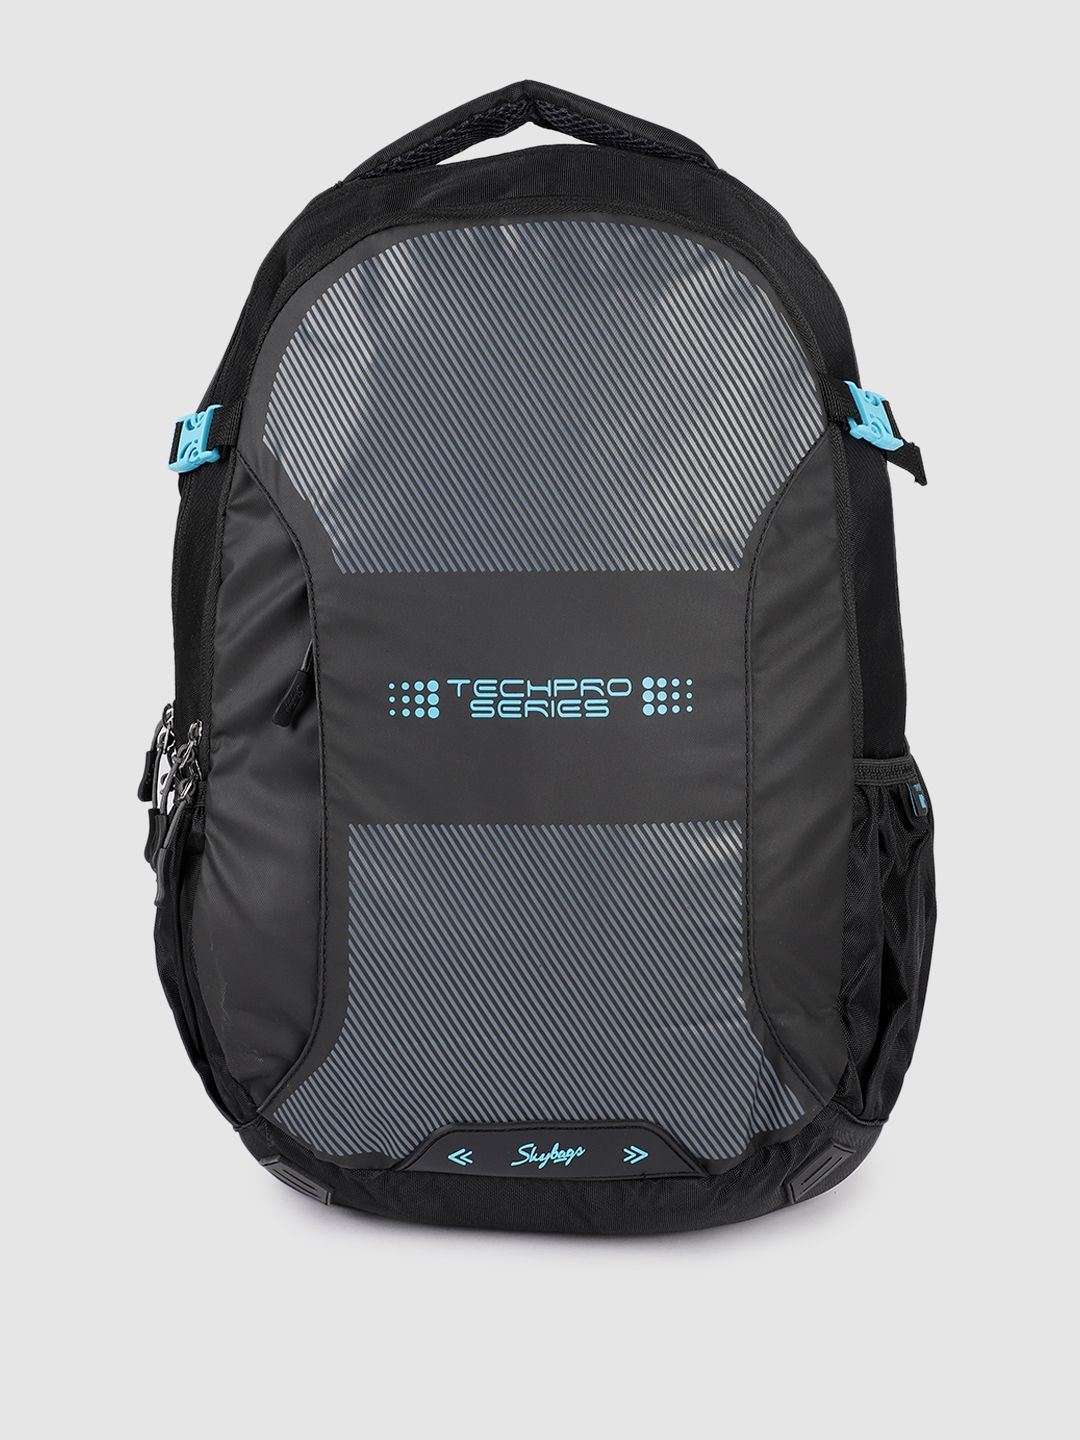 Skybags Unisex Black Striped Backpack with Compression Straps Price in India